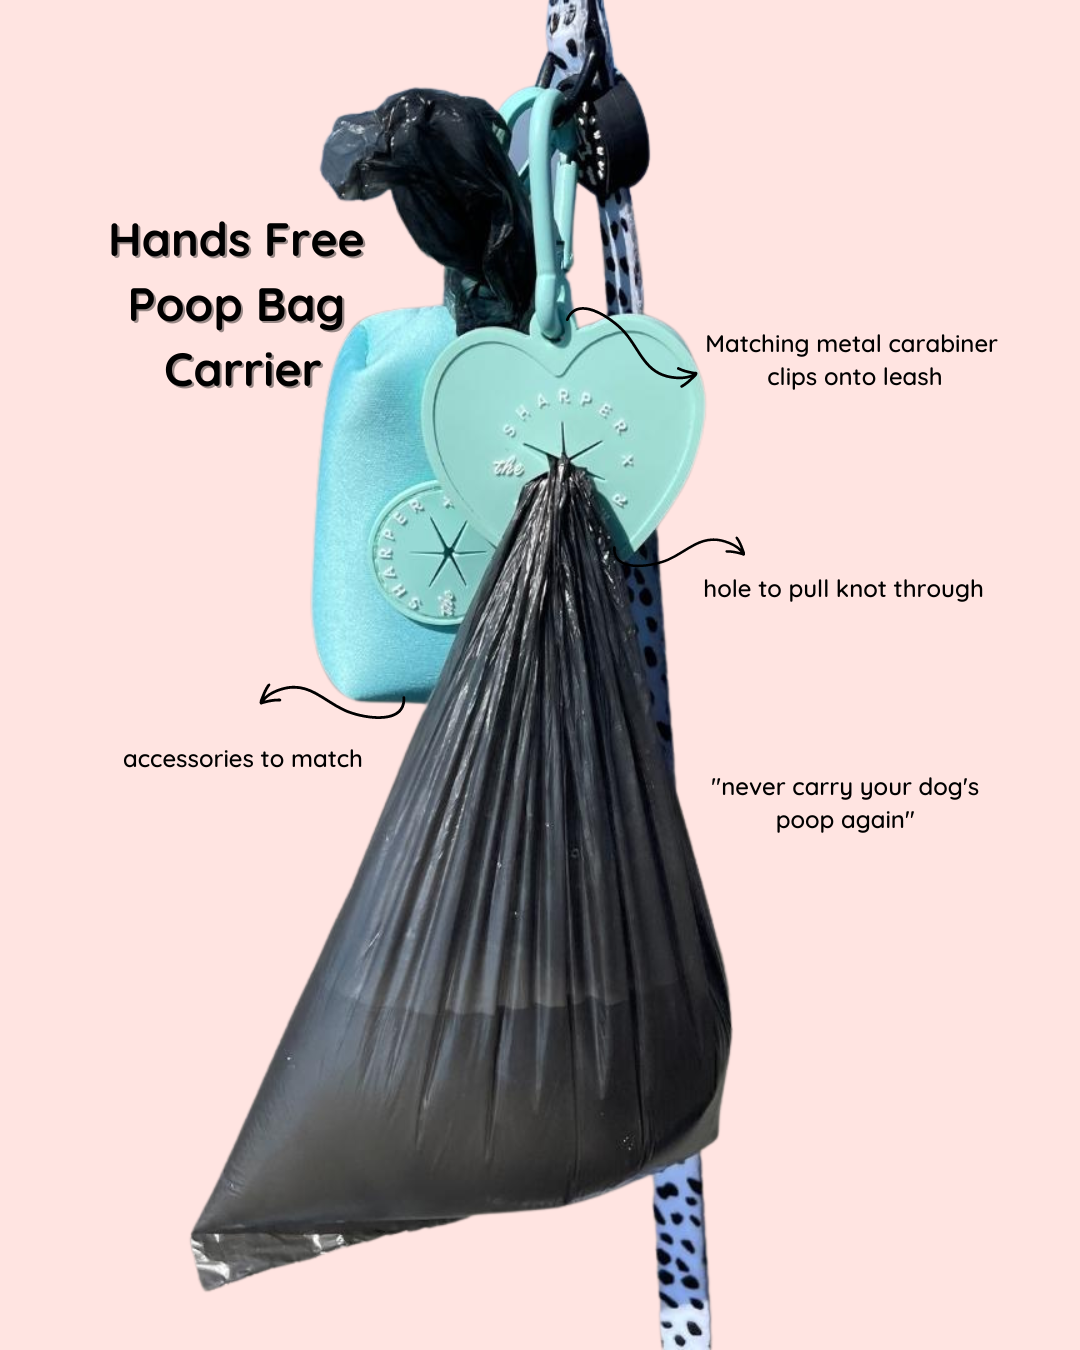 Hands Free Waste Carriers